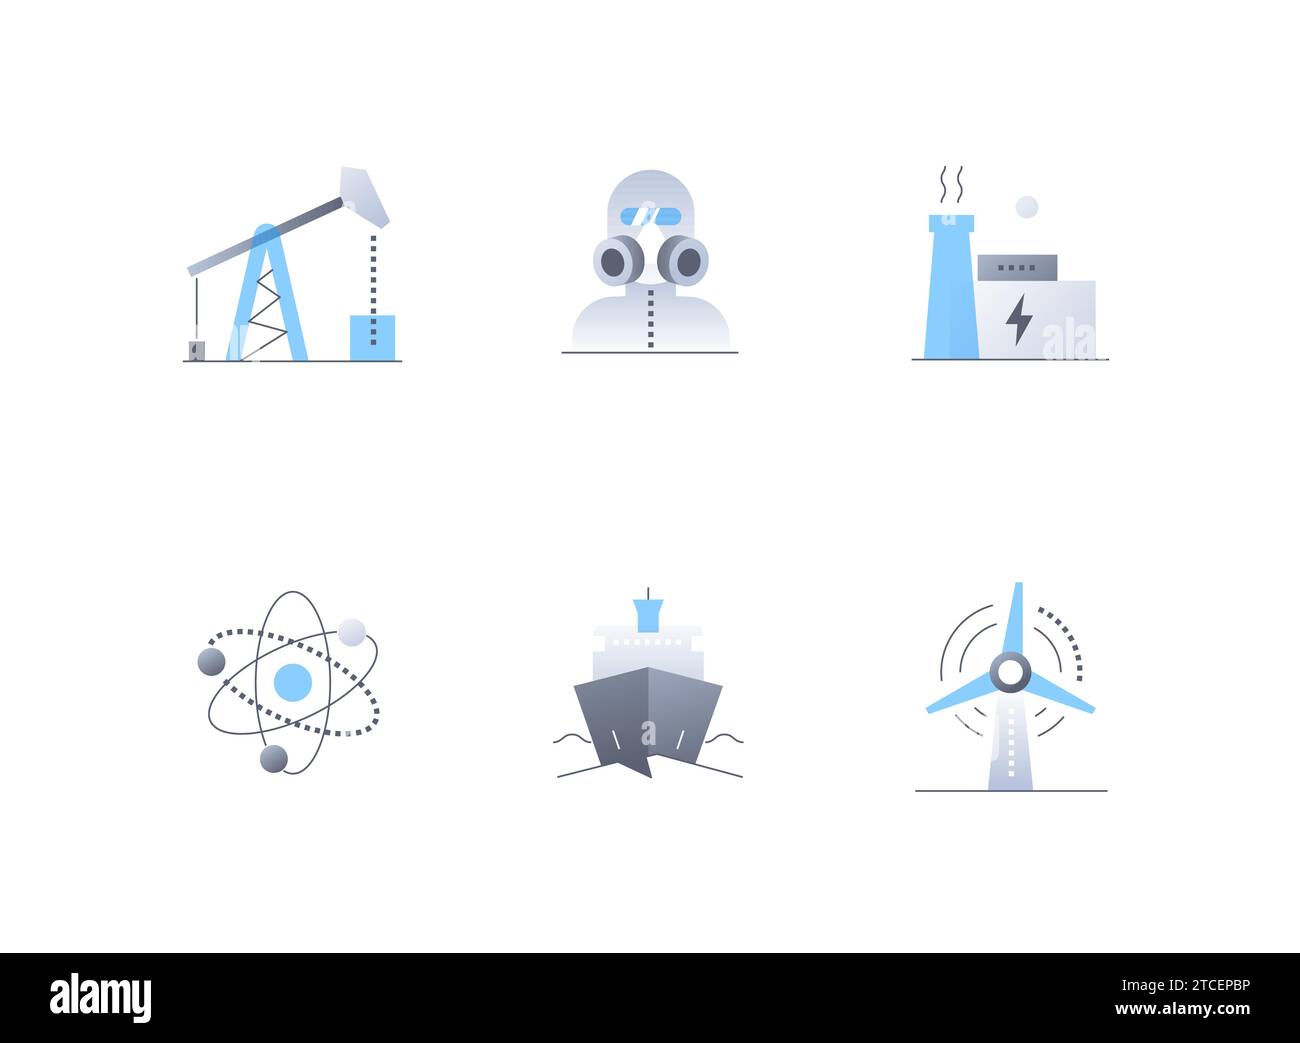 Industrialization and energy sources - flat design style icons set Stock Vector